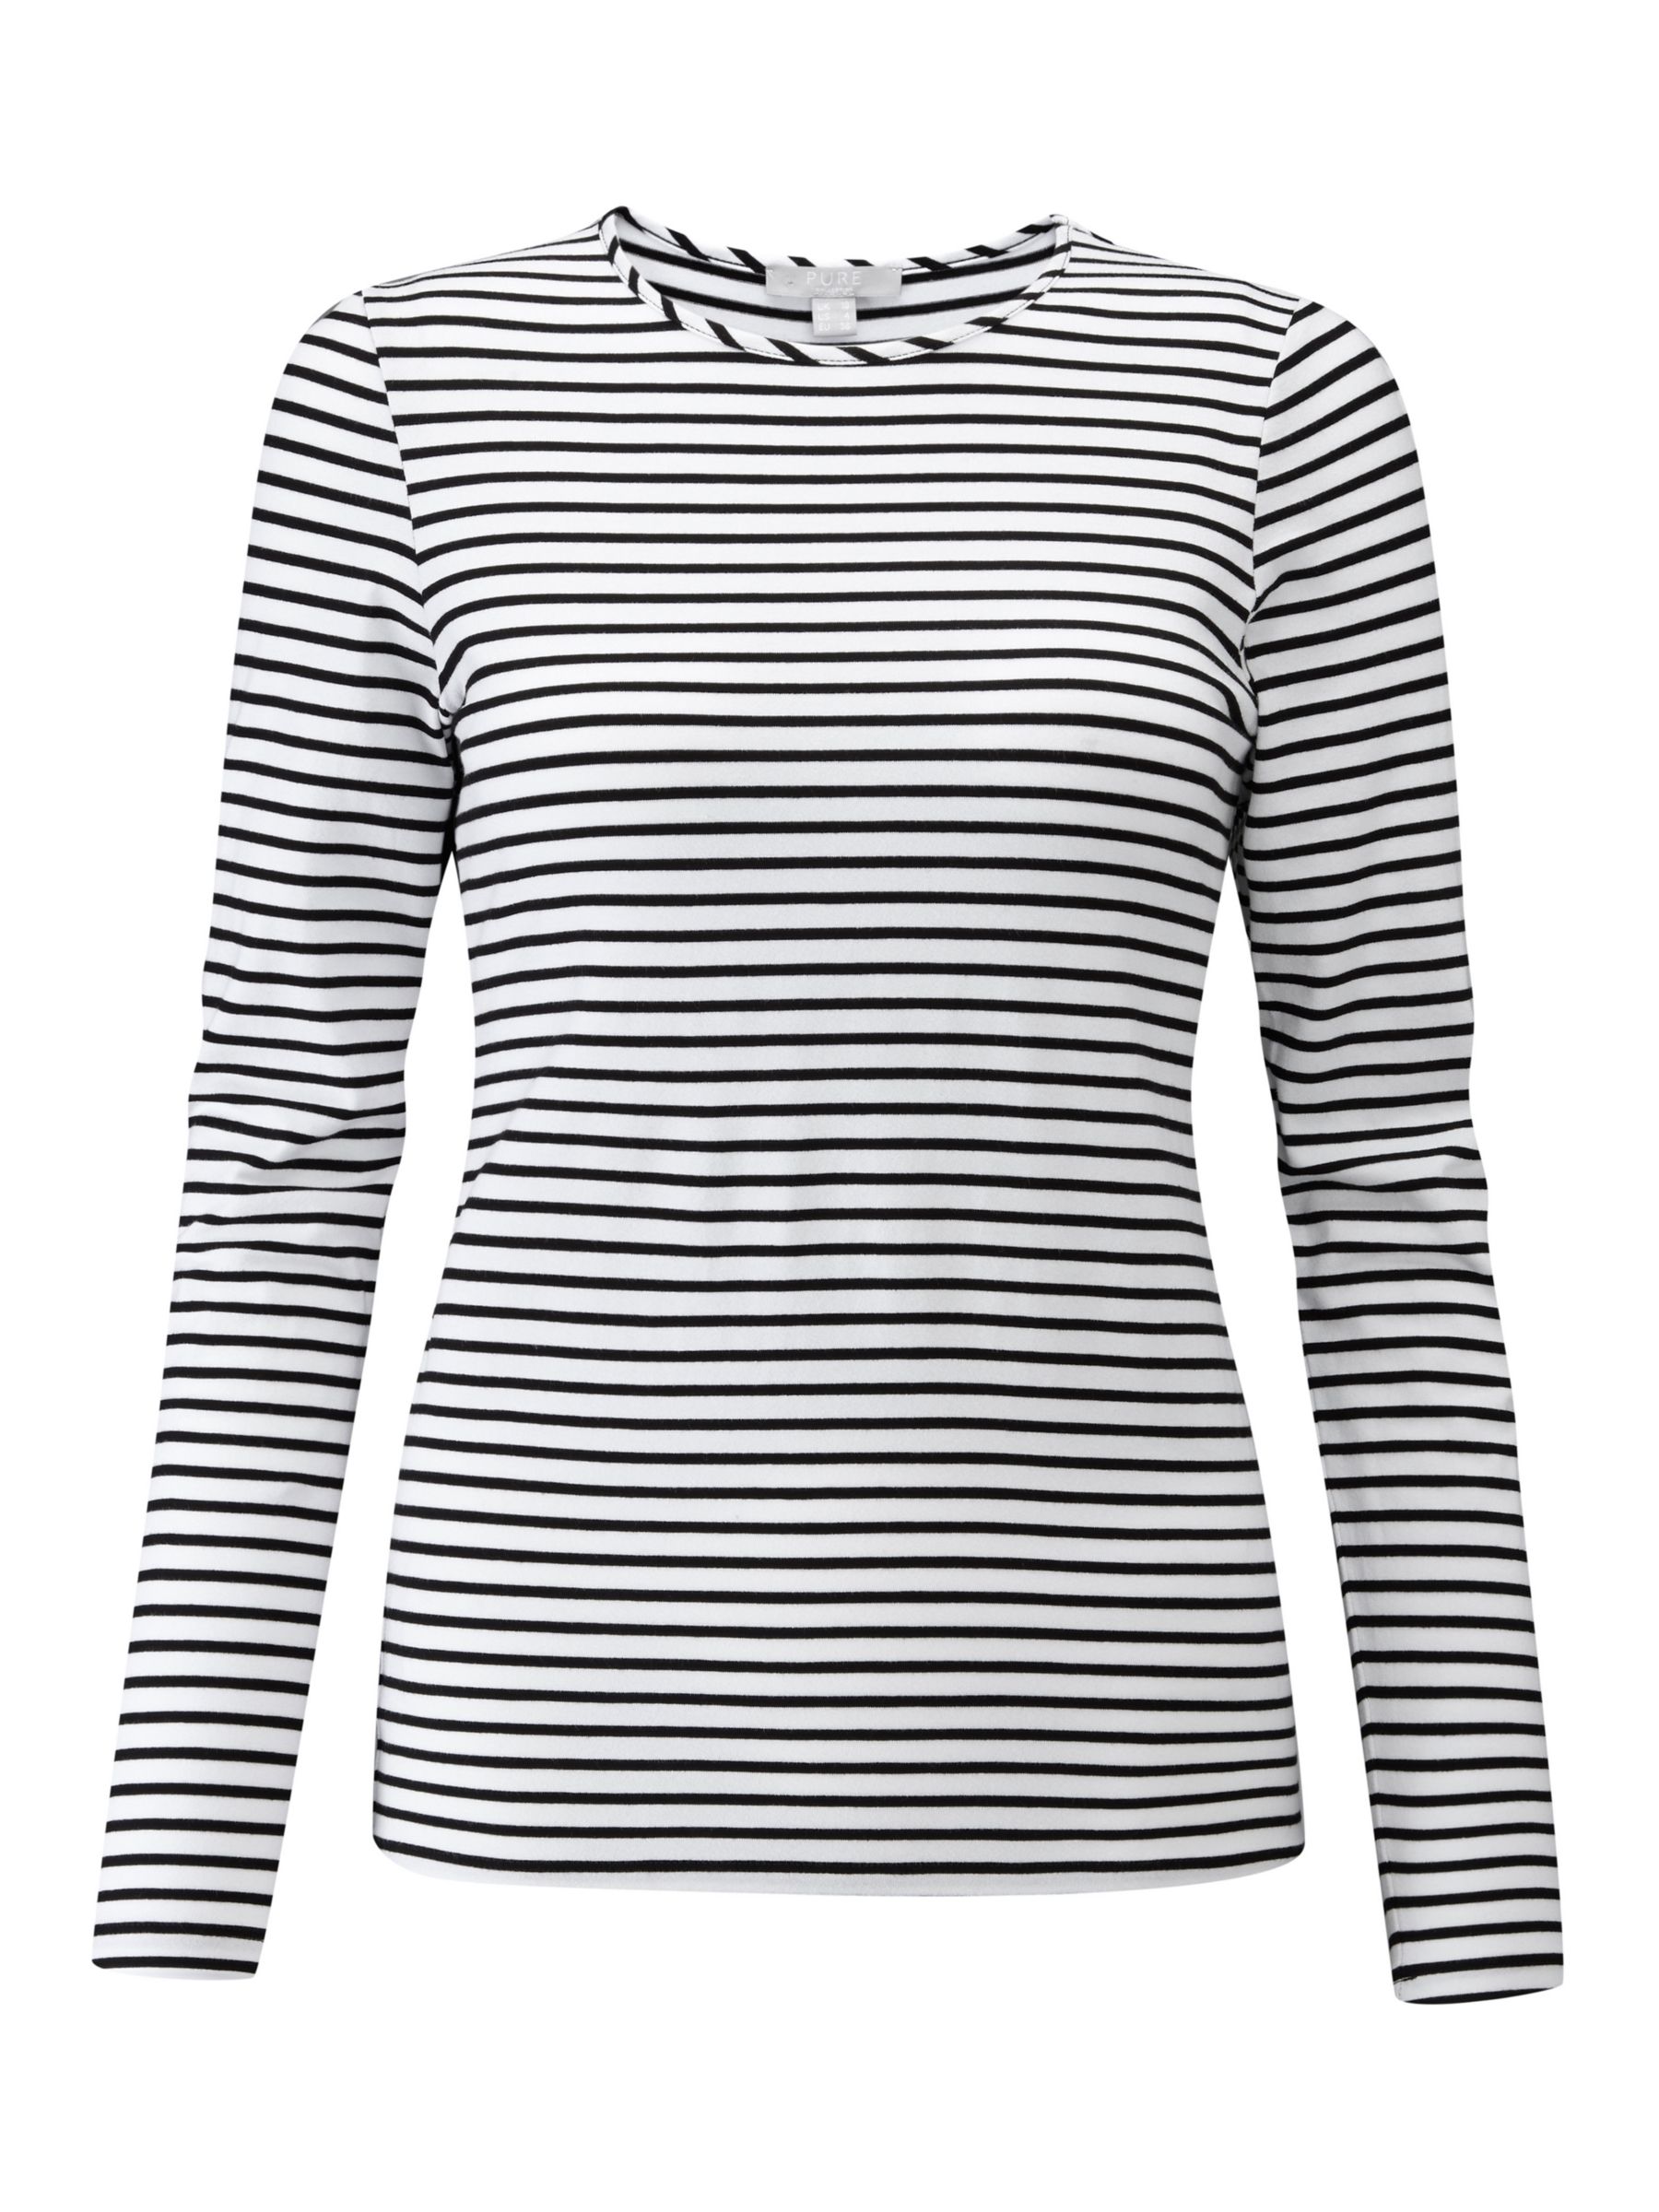 Pure Collection Soft Jersey Crew Neck Top, Black/White